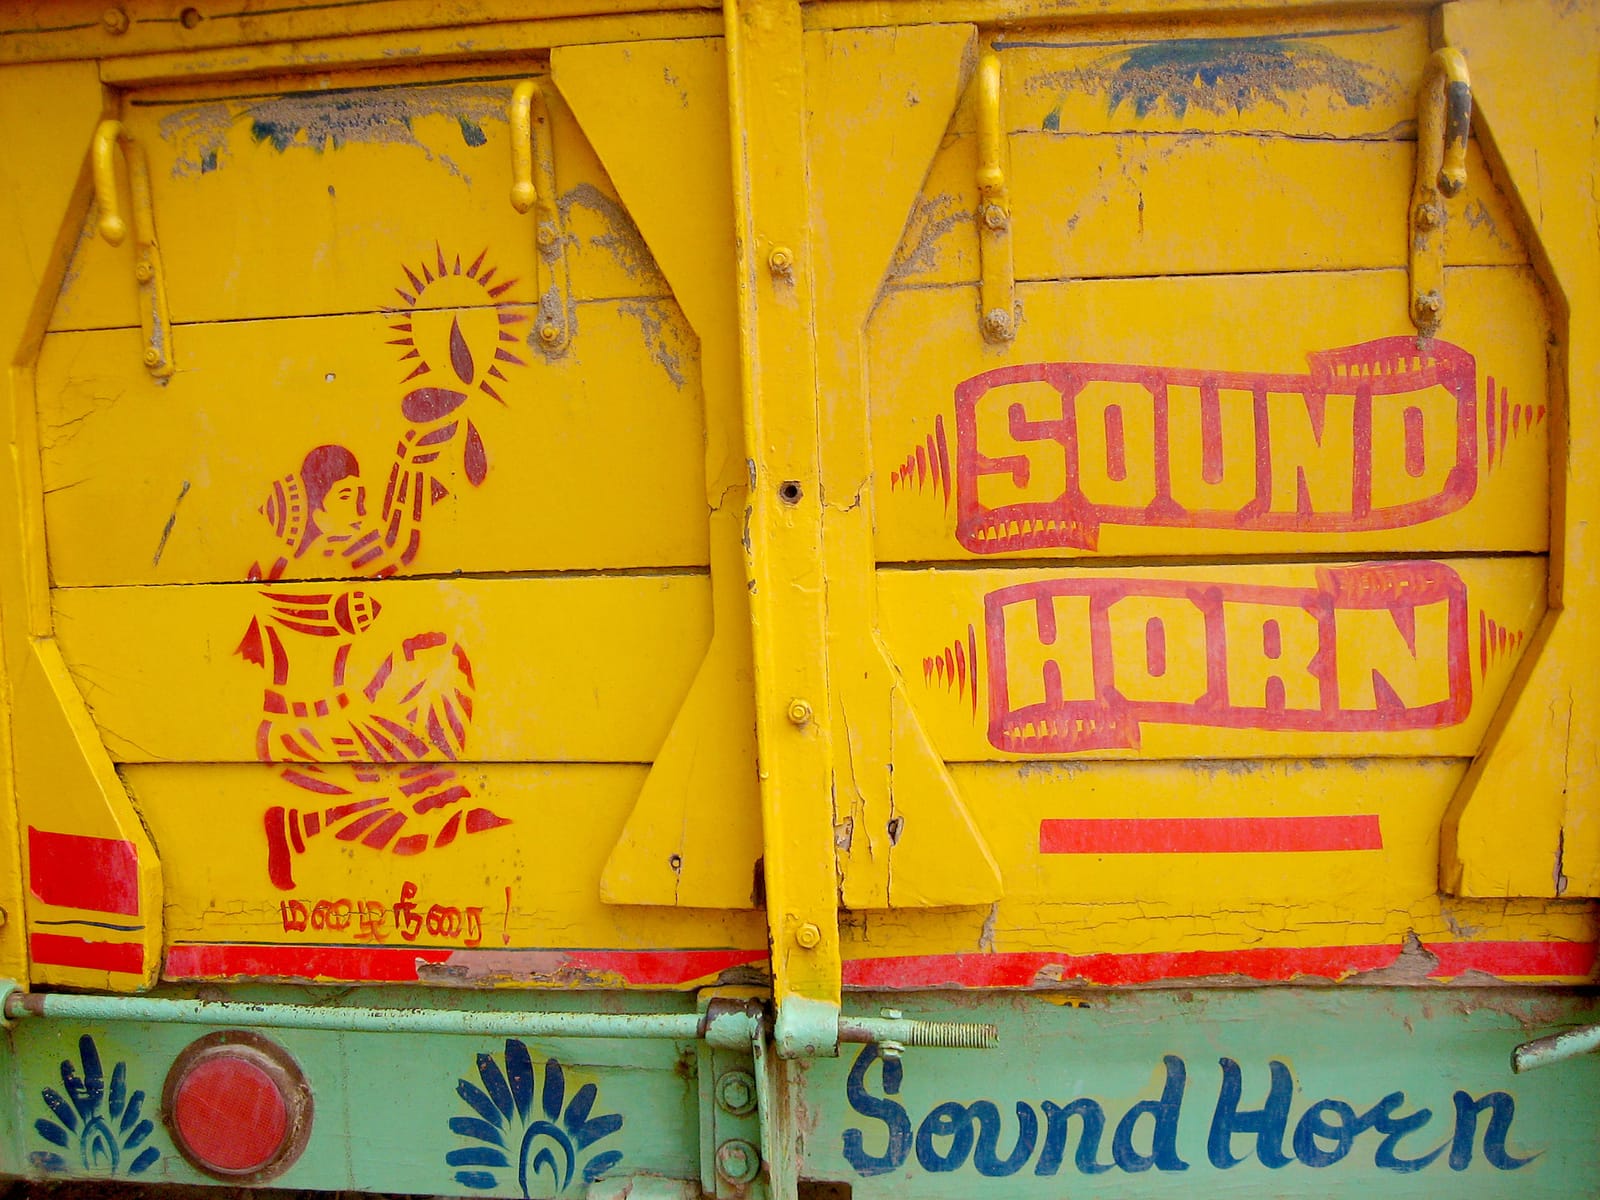 Back of a truck painted mainly in yellow with a stencil-style illustration of a woman holding a candle on the left and lettering on the right that reads "sound horn". Below is a horizontal strip in light green that repeats the "shound horn" message.